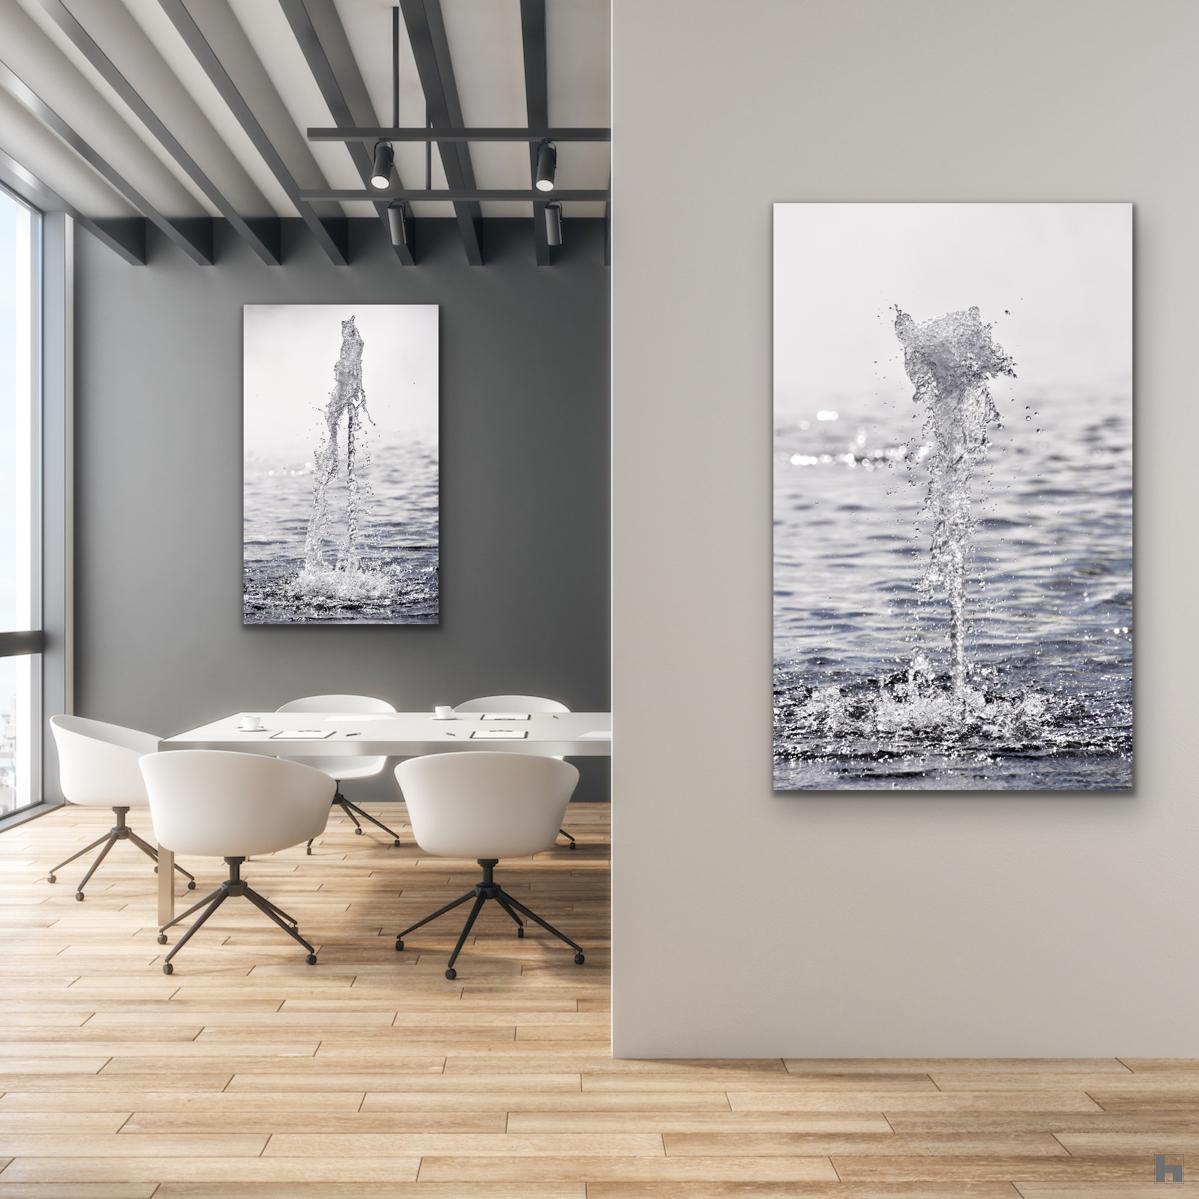 Diptych "Cape Canaveral" and "Mischief", magic of water